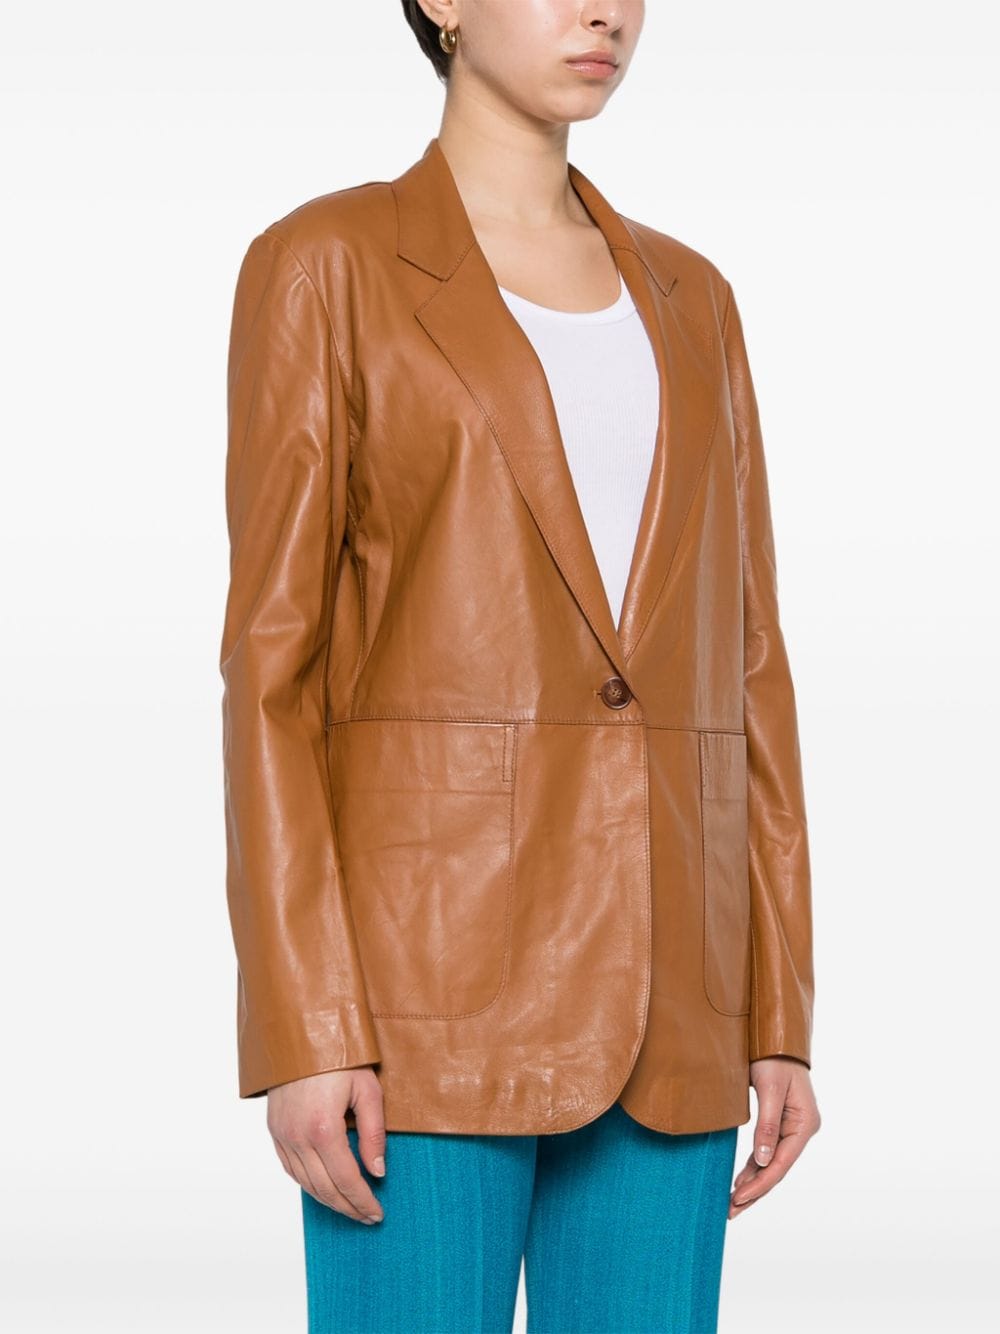 Alysi Jackets Leather Brown